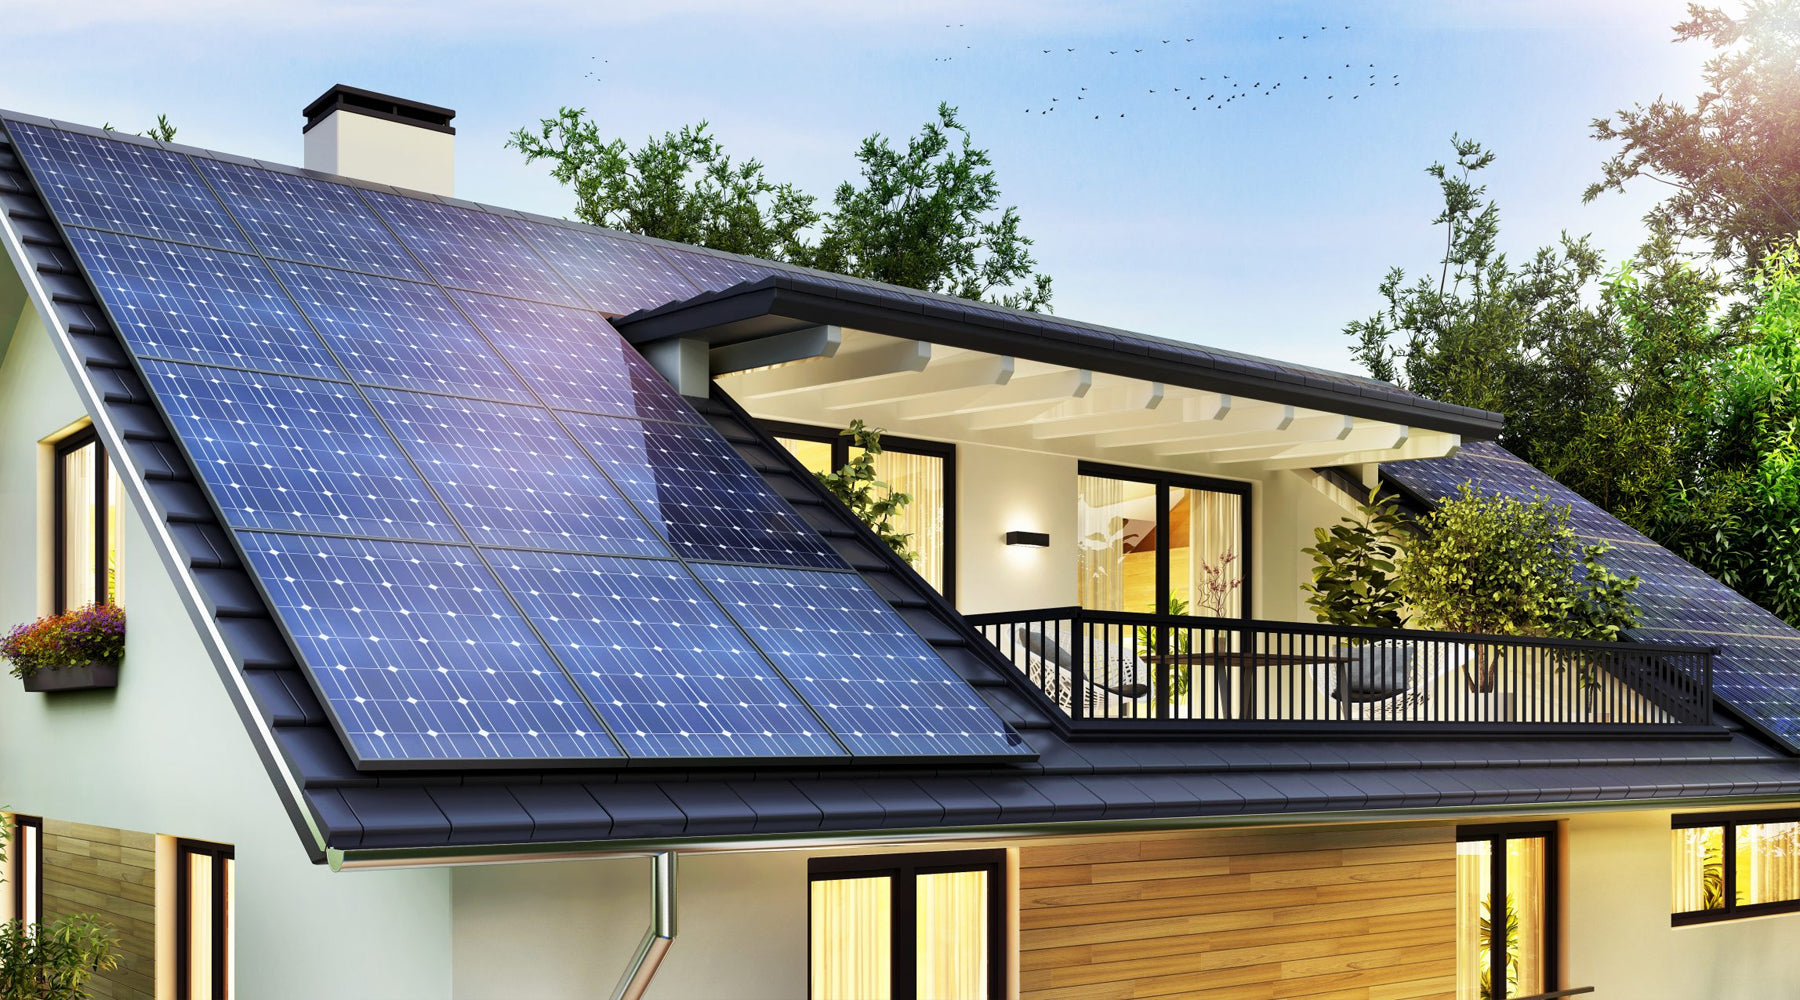 How much does a Solar Power System cost?